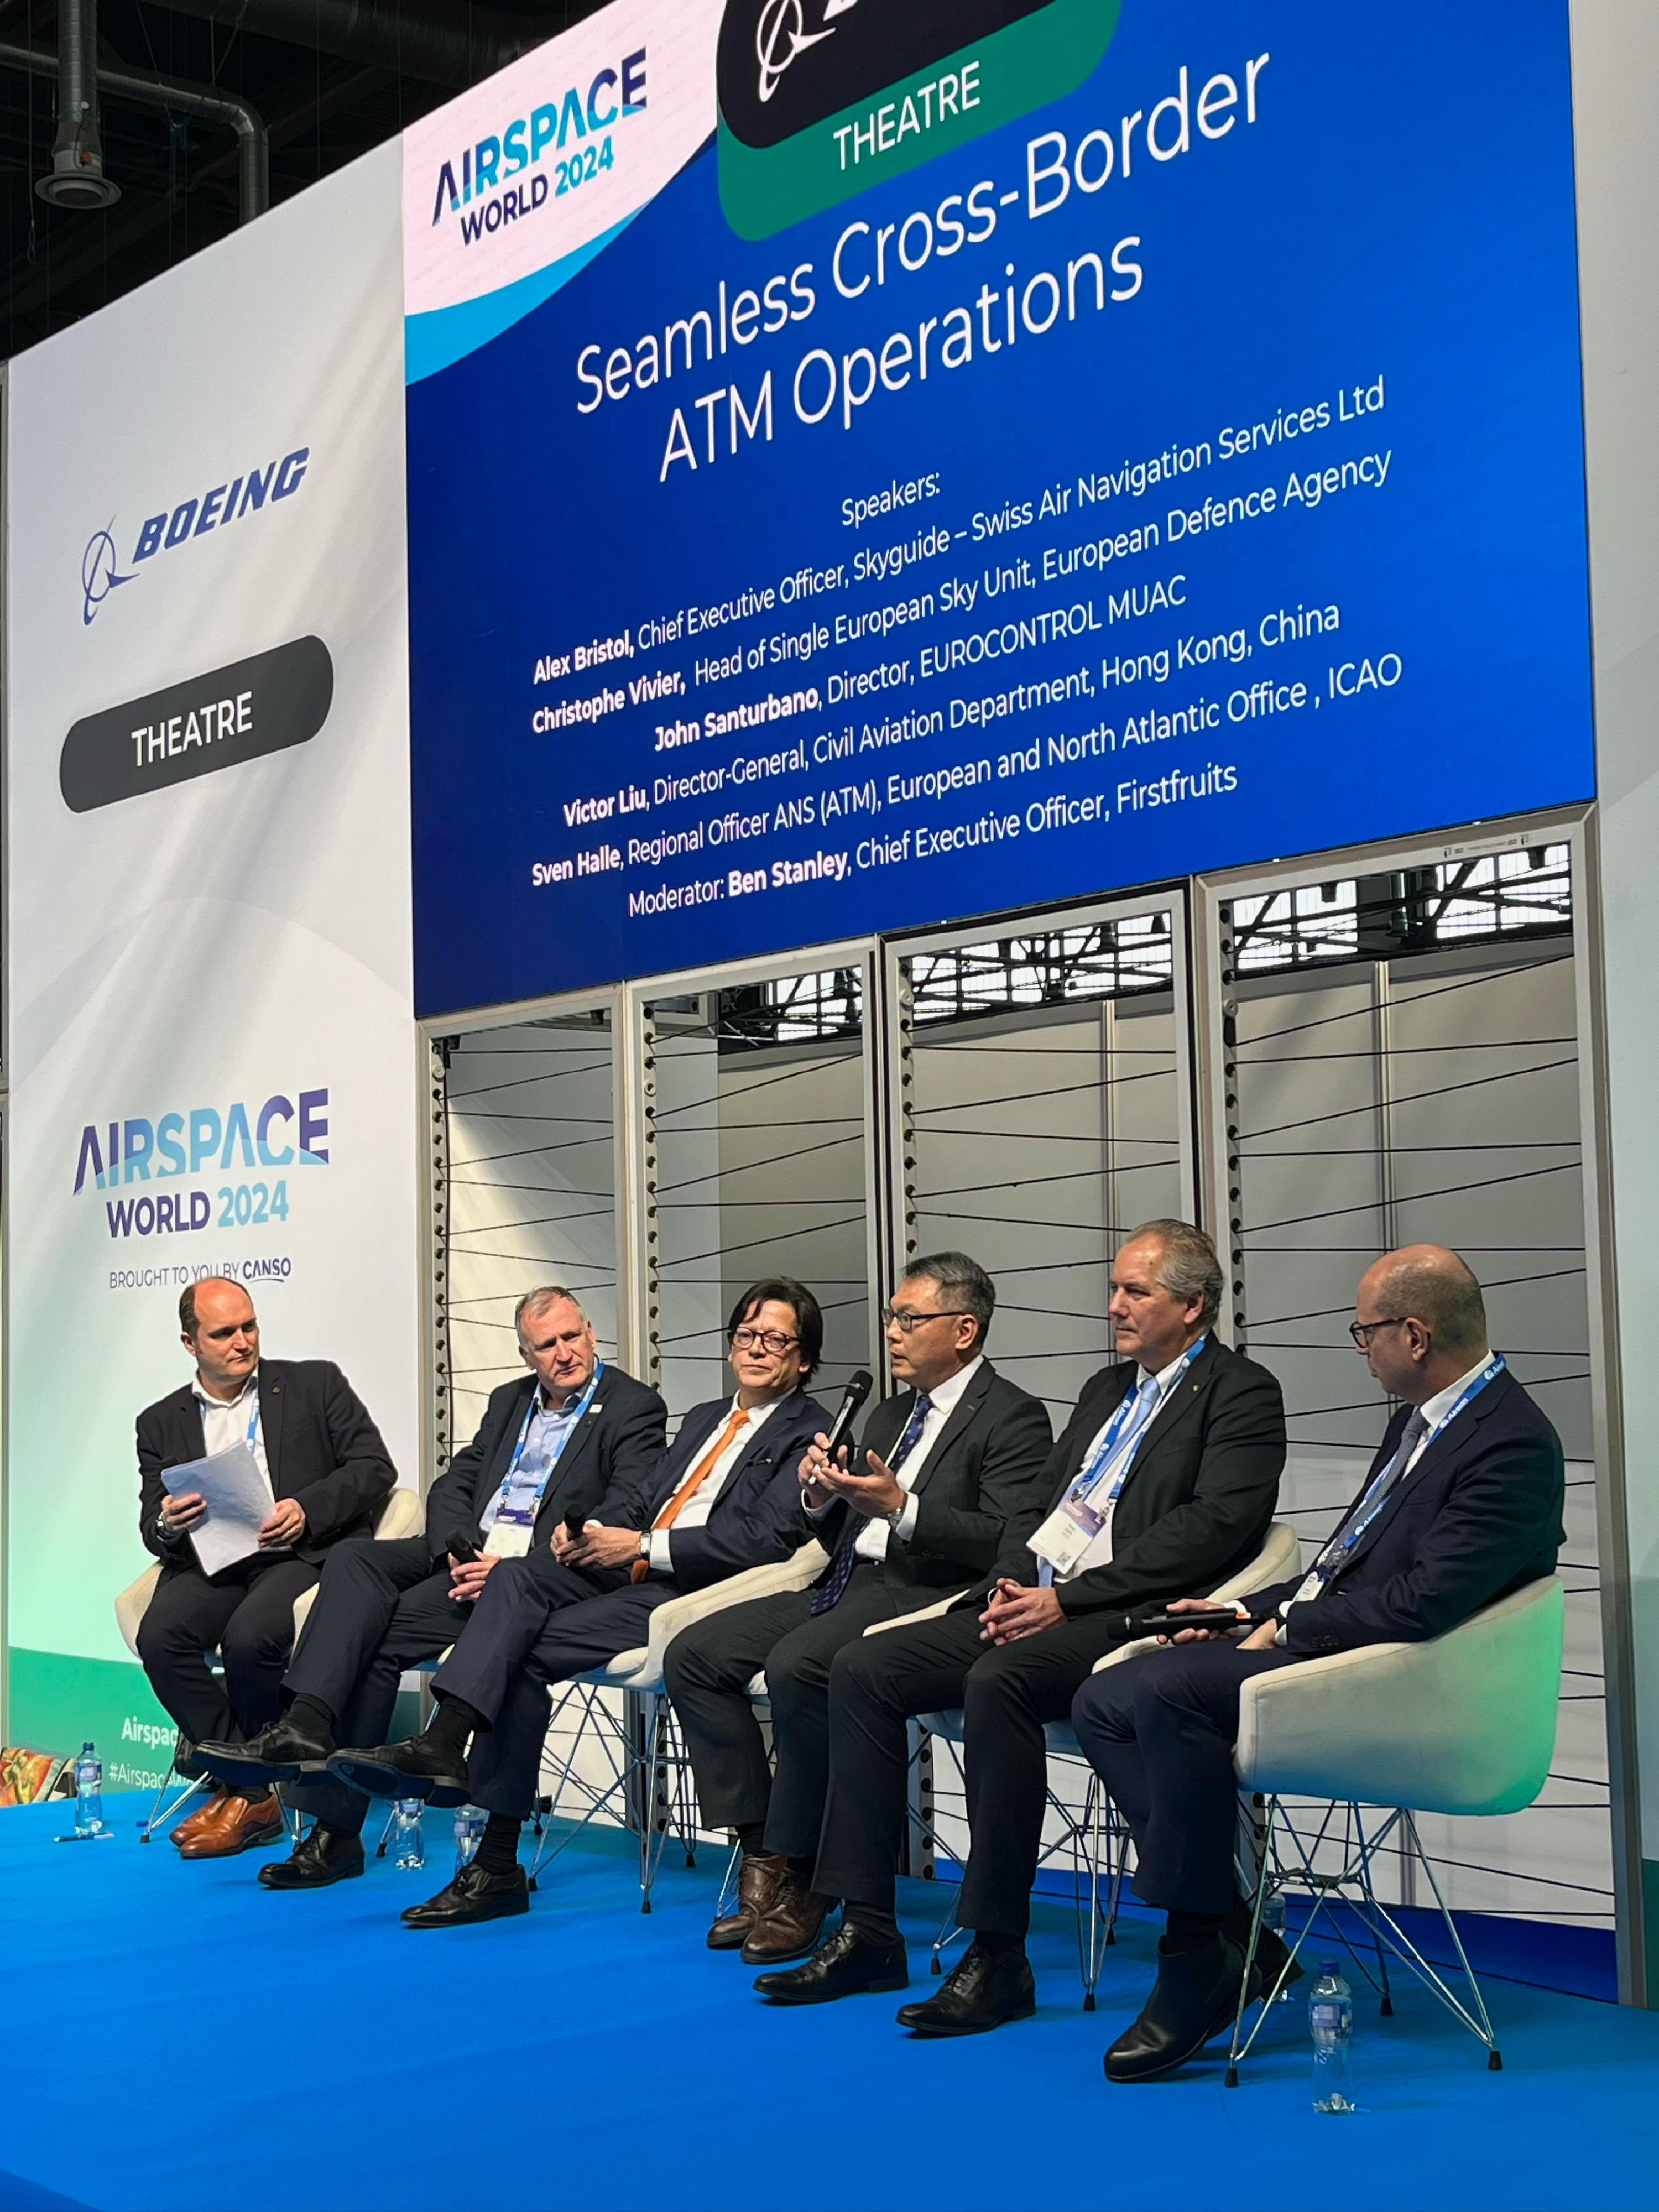 The Airspace World 2024 and award presentation ceremony was held yesterday (March 19, Geneva time) in Geneva, Switzerland. Photo shows the Director-General of Civil Aviation, Mr Victor Liu (third right), speaking as part of an expert panel during the event.